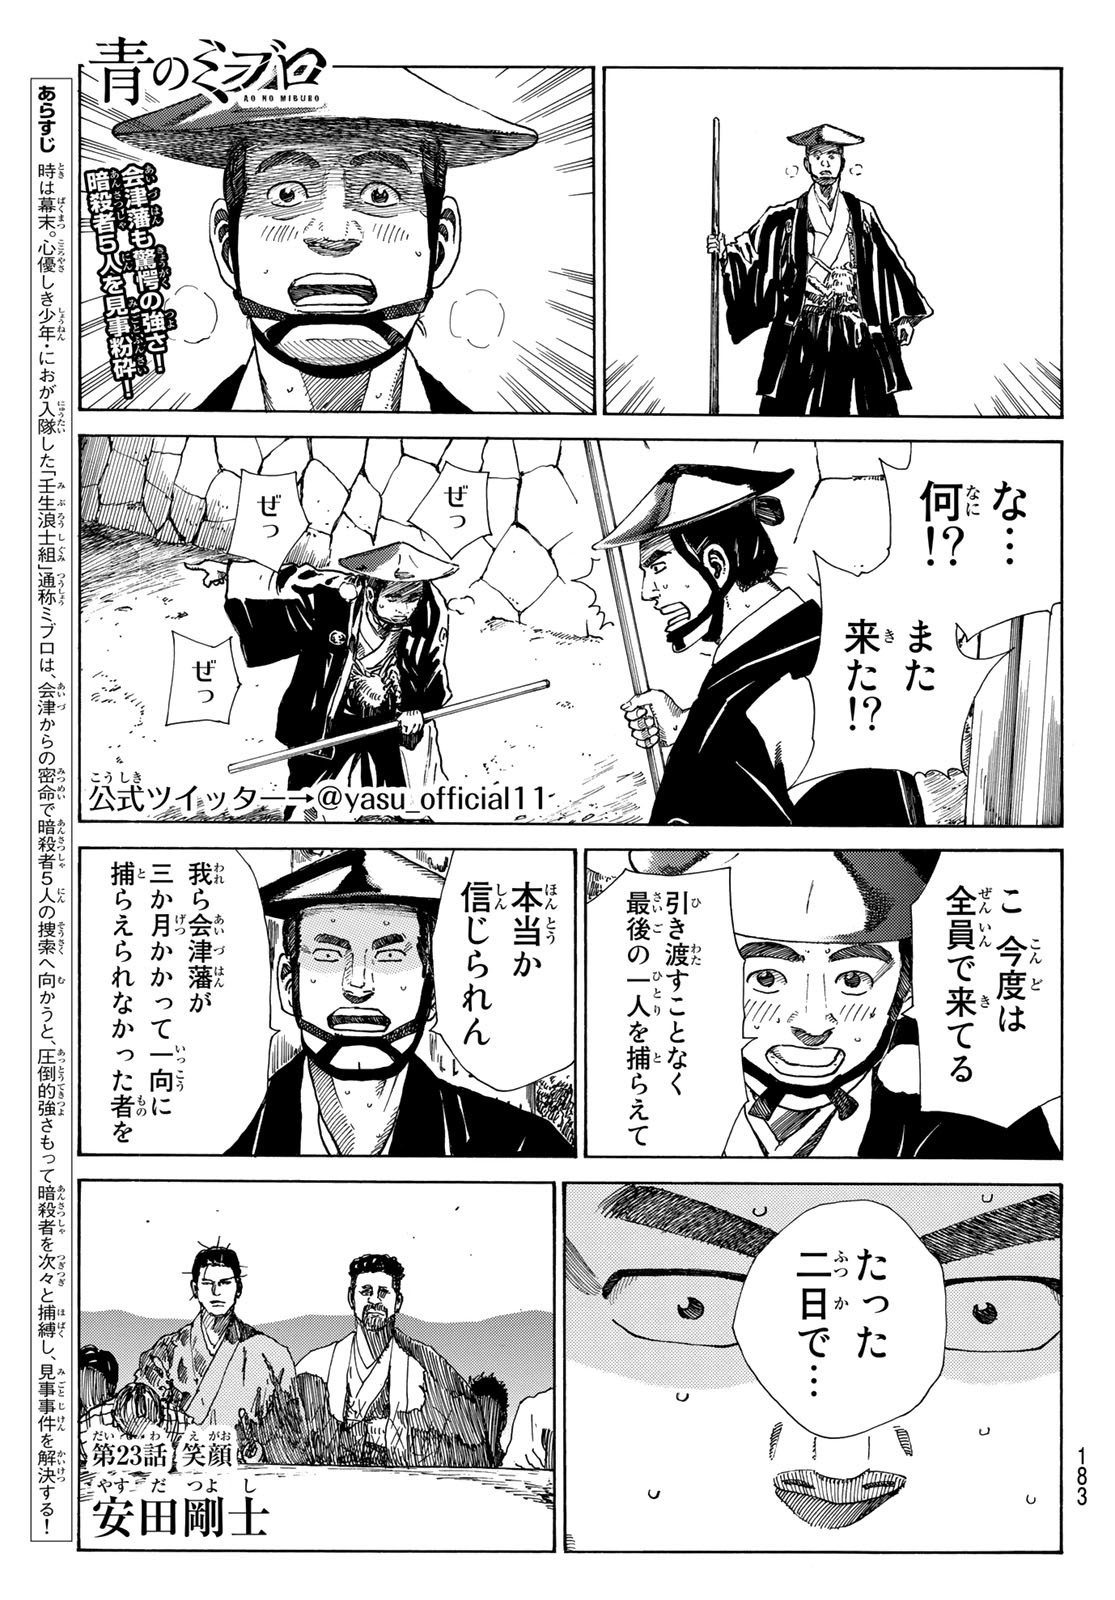 An Mo Miburo 第23話 - Page 1